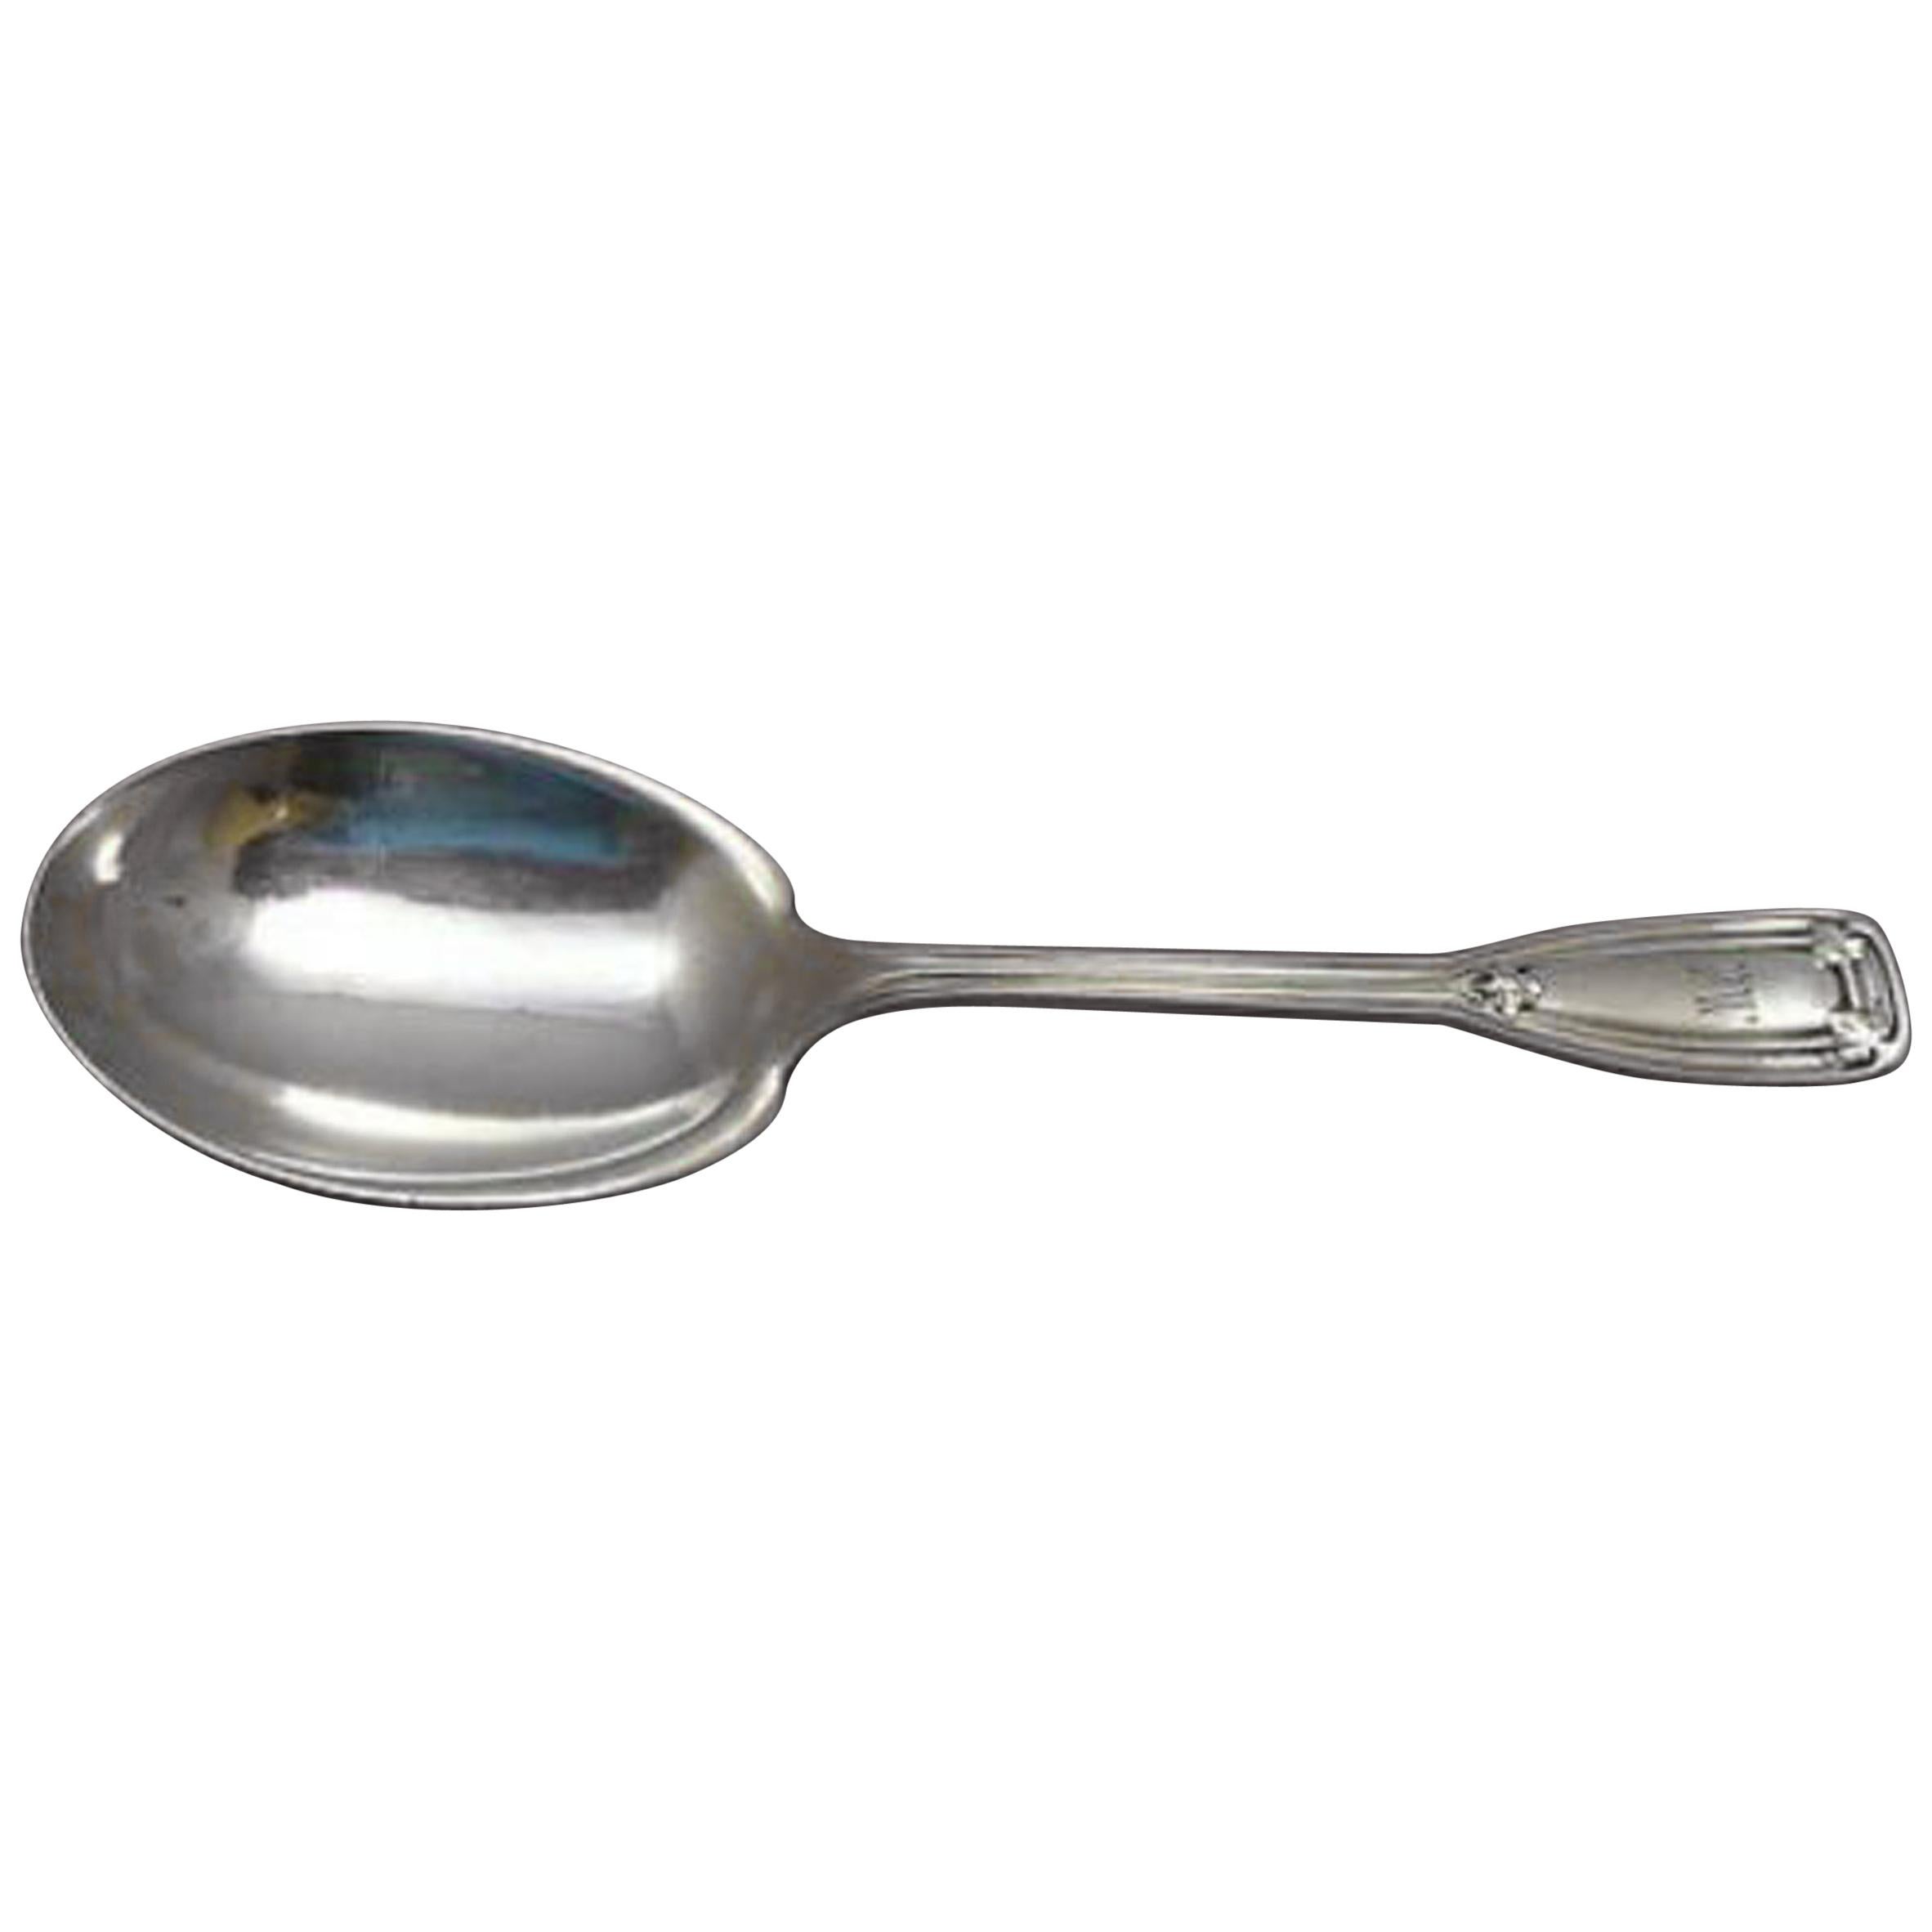 Saint Dunstan by Tiffany & Co. Sterling Silver Ice Cream Serving Spoon